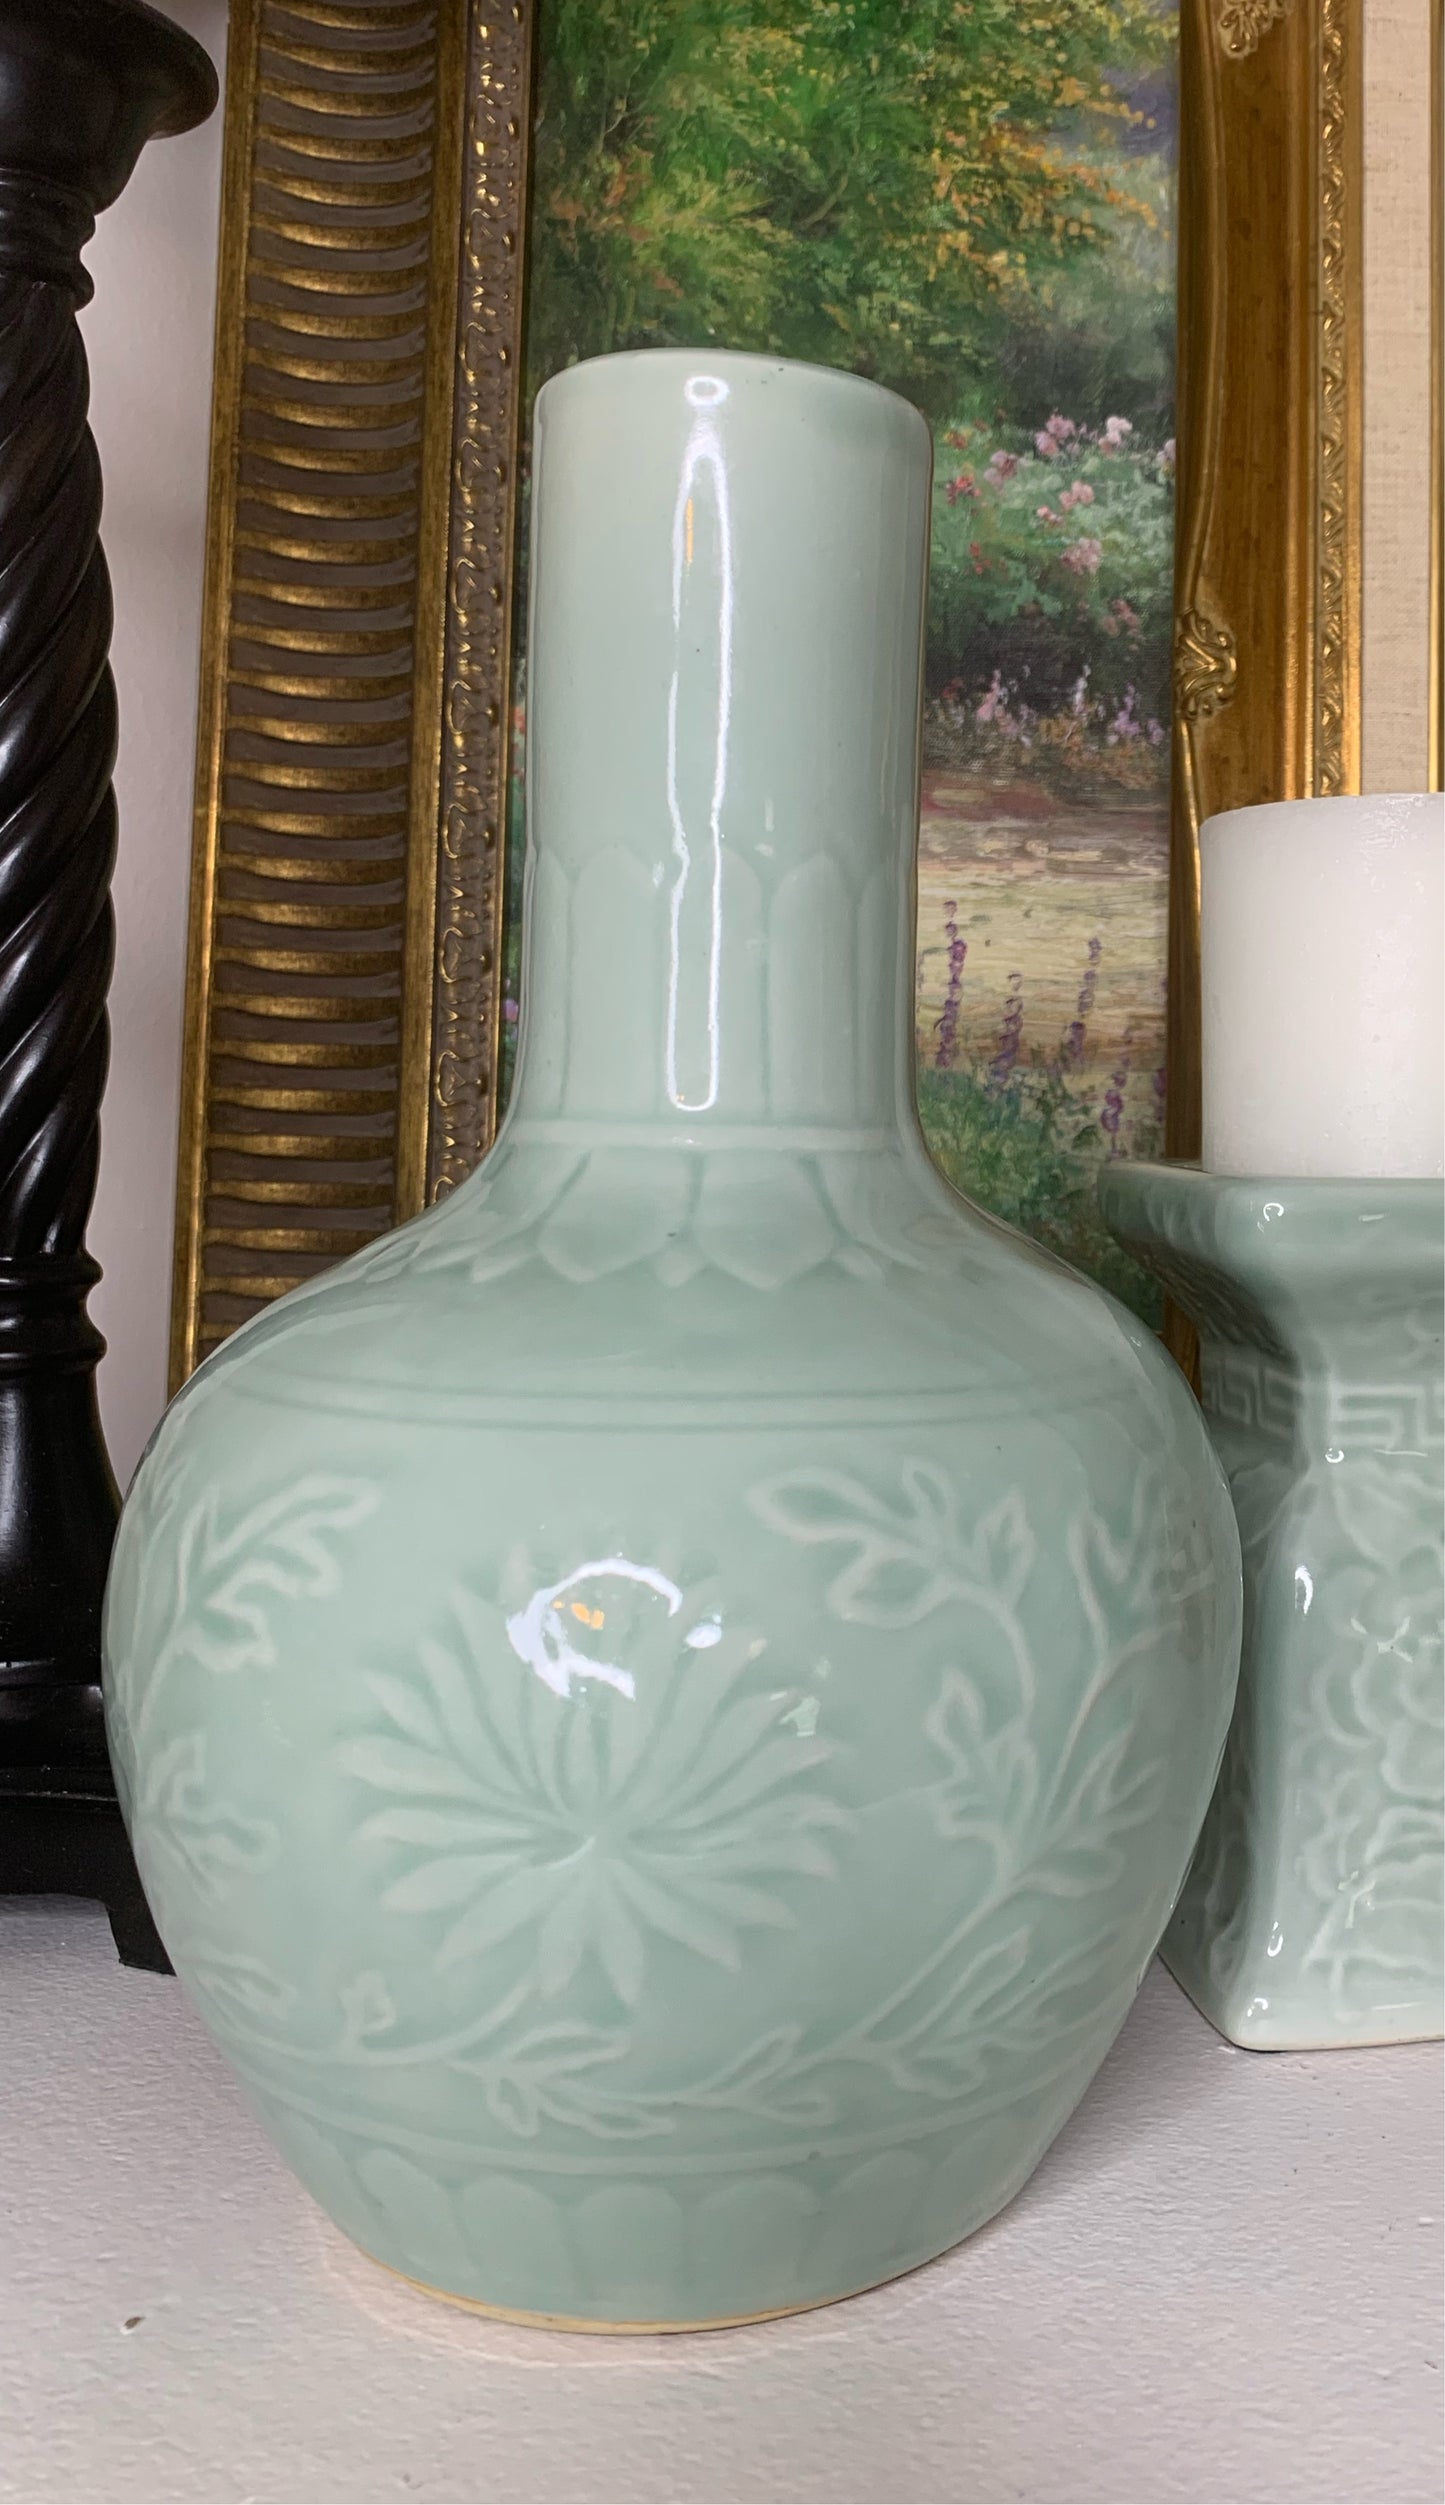 Beautiful Celadon tall vase - Excellent condition!